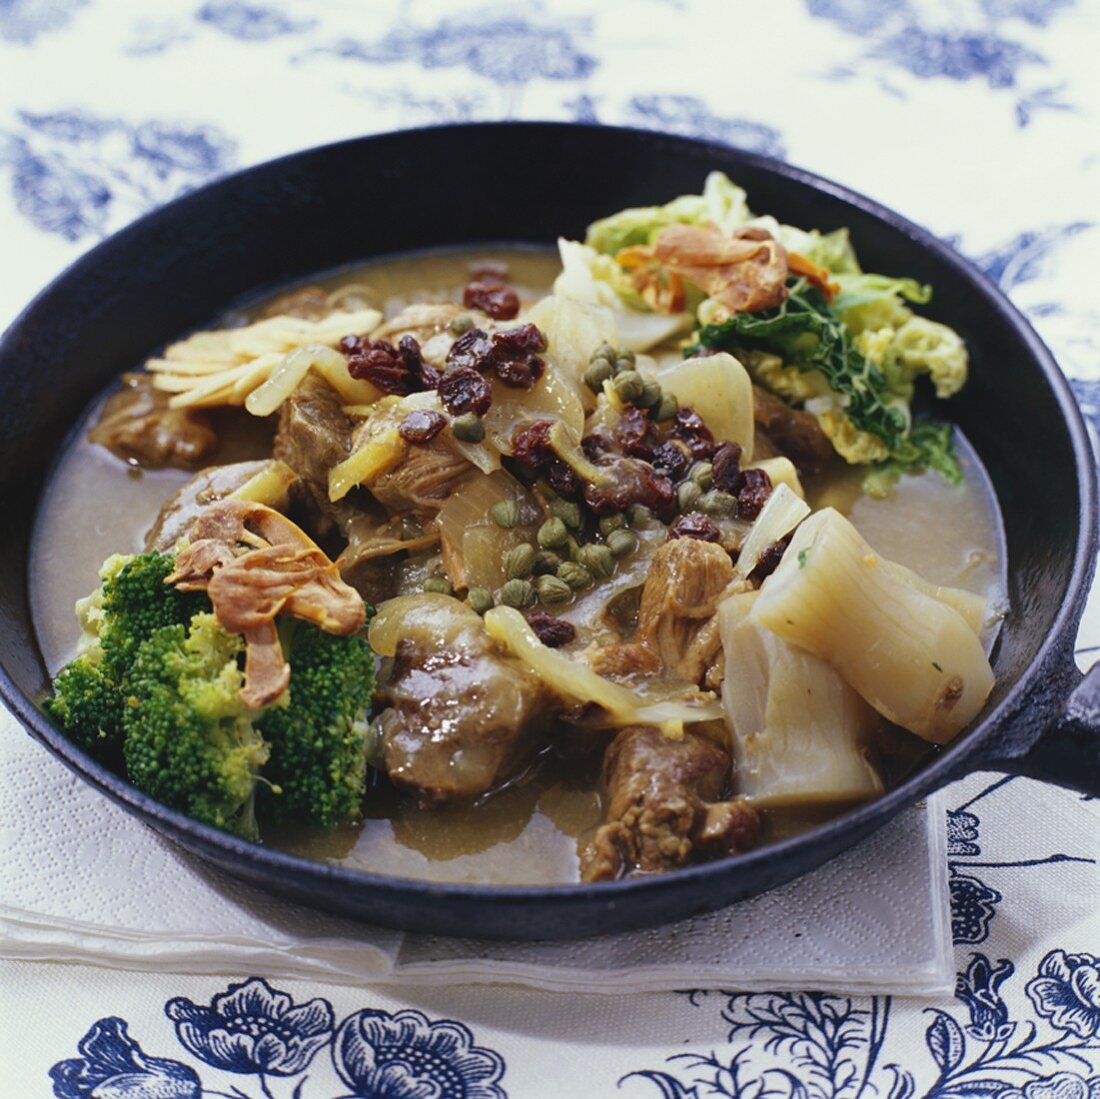 Lamb and vegetable ragout with capers, mace and raisins